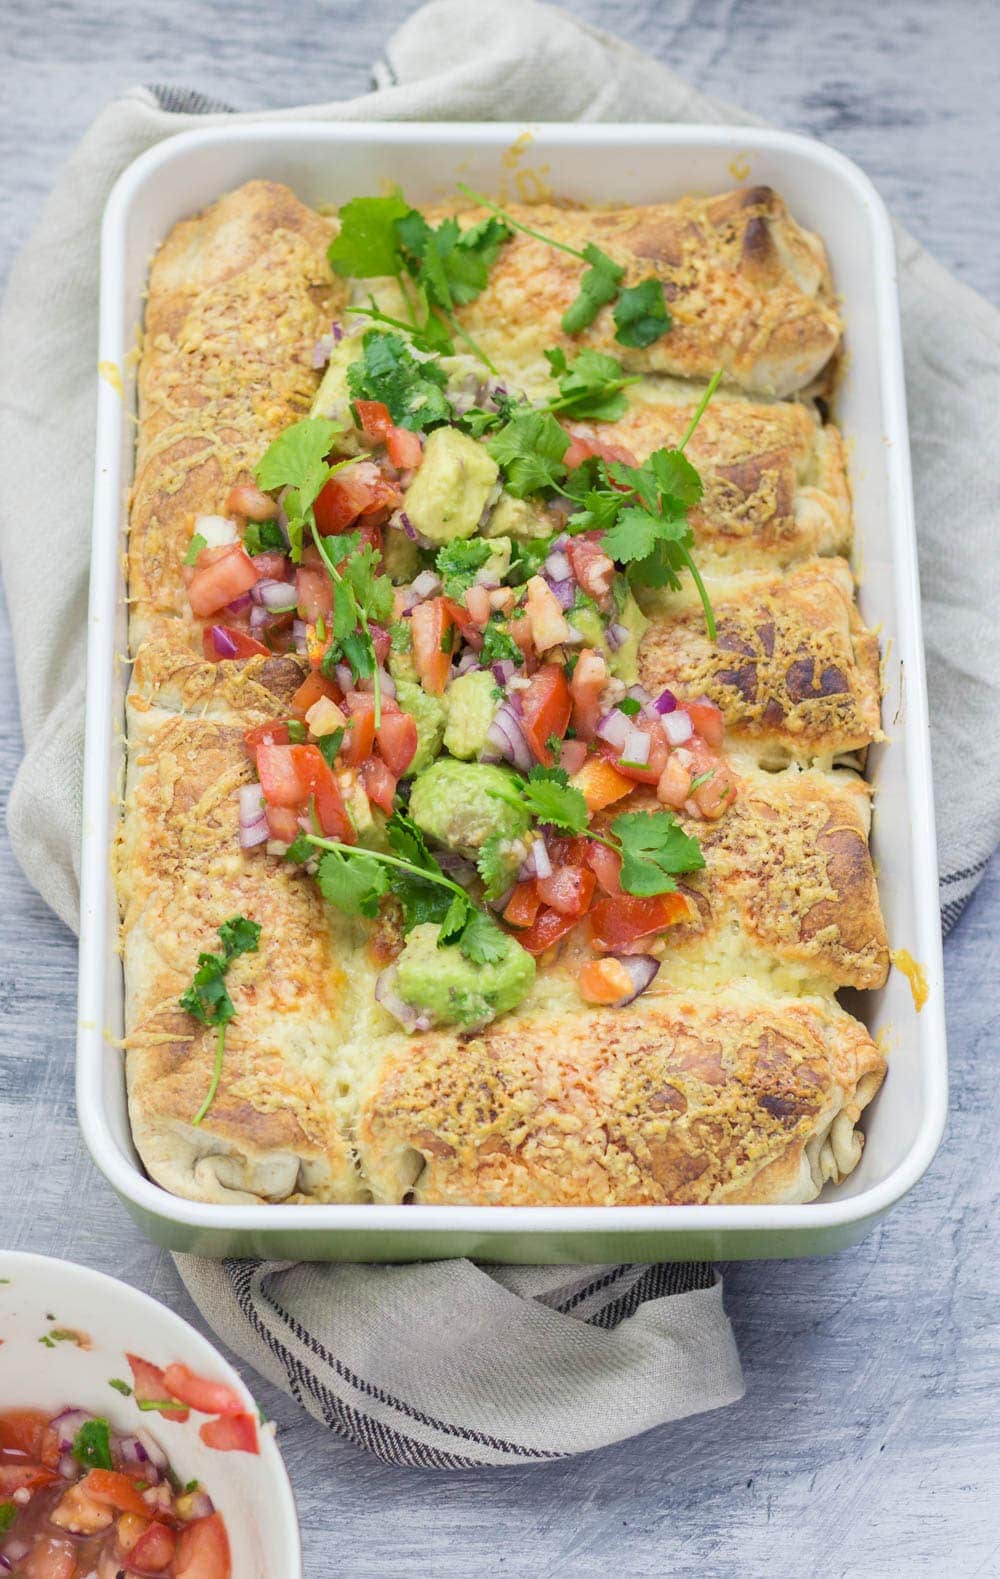 Baking dish of beef enchiladas topped with salsa